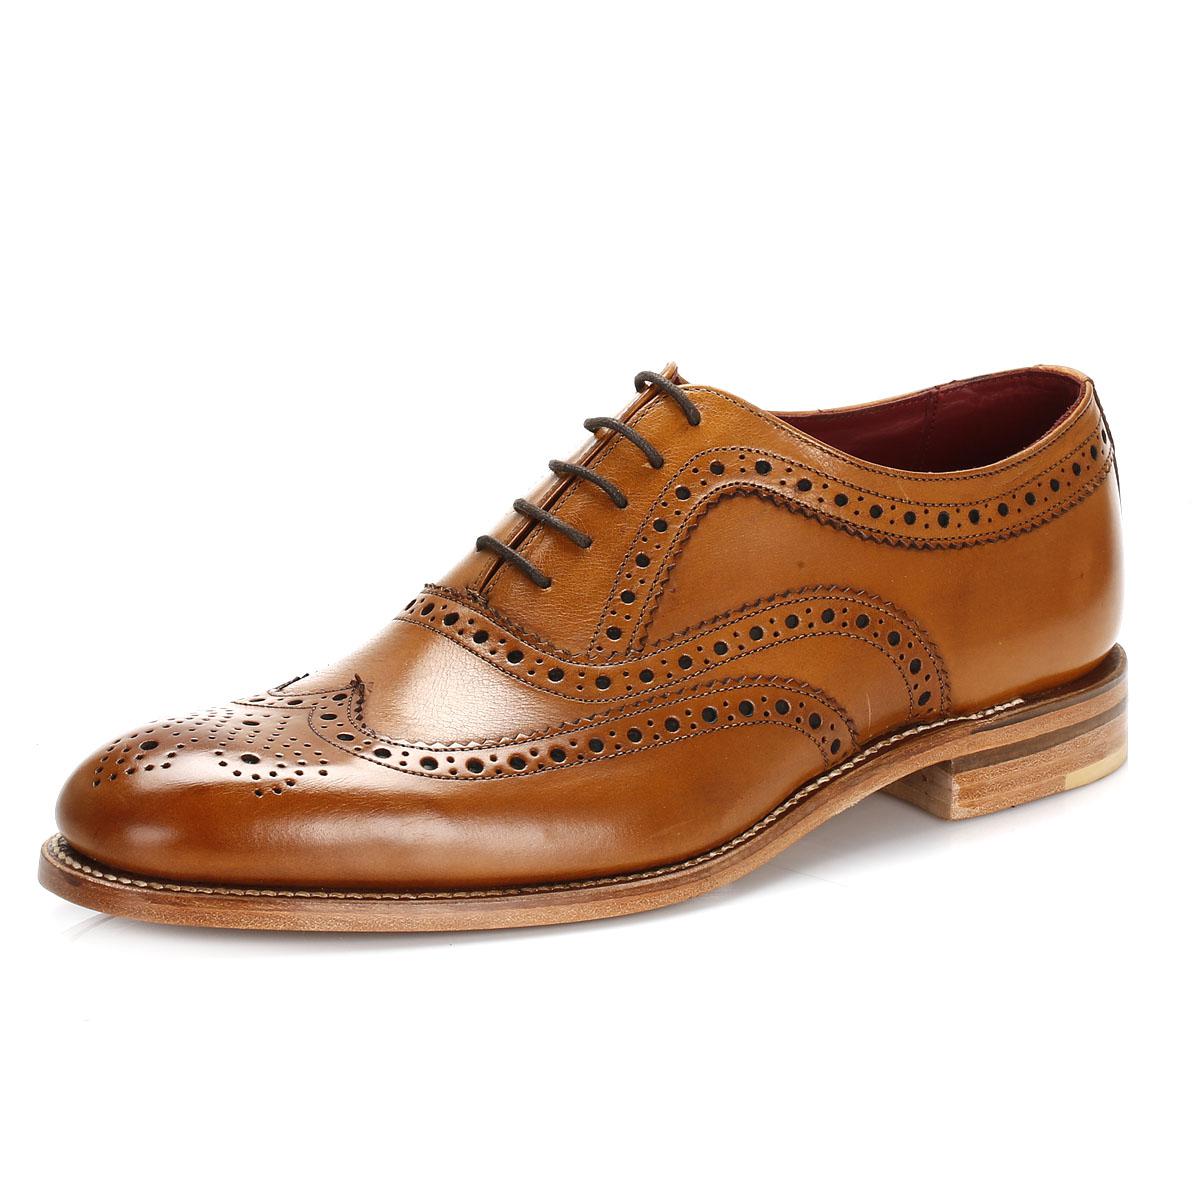 Loake Leather Fearnley Tan Brogues in no (Brown) for Men - Lyst